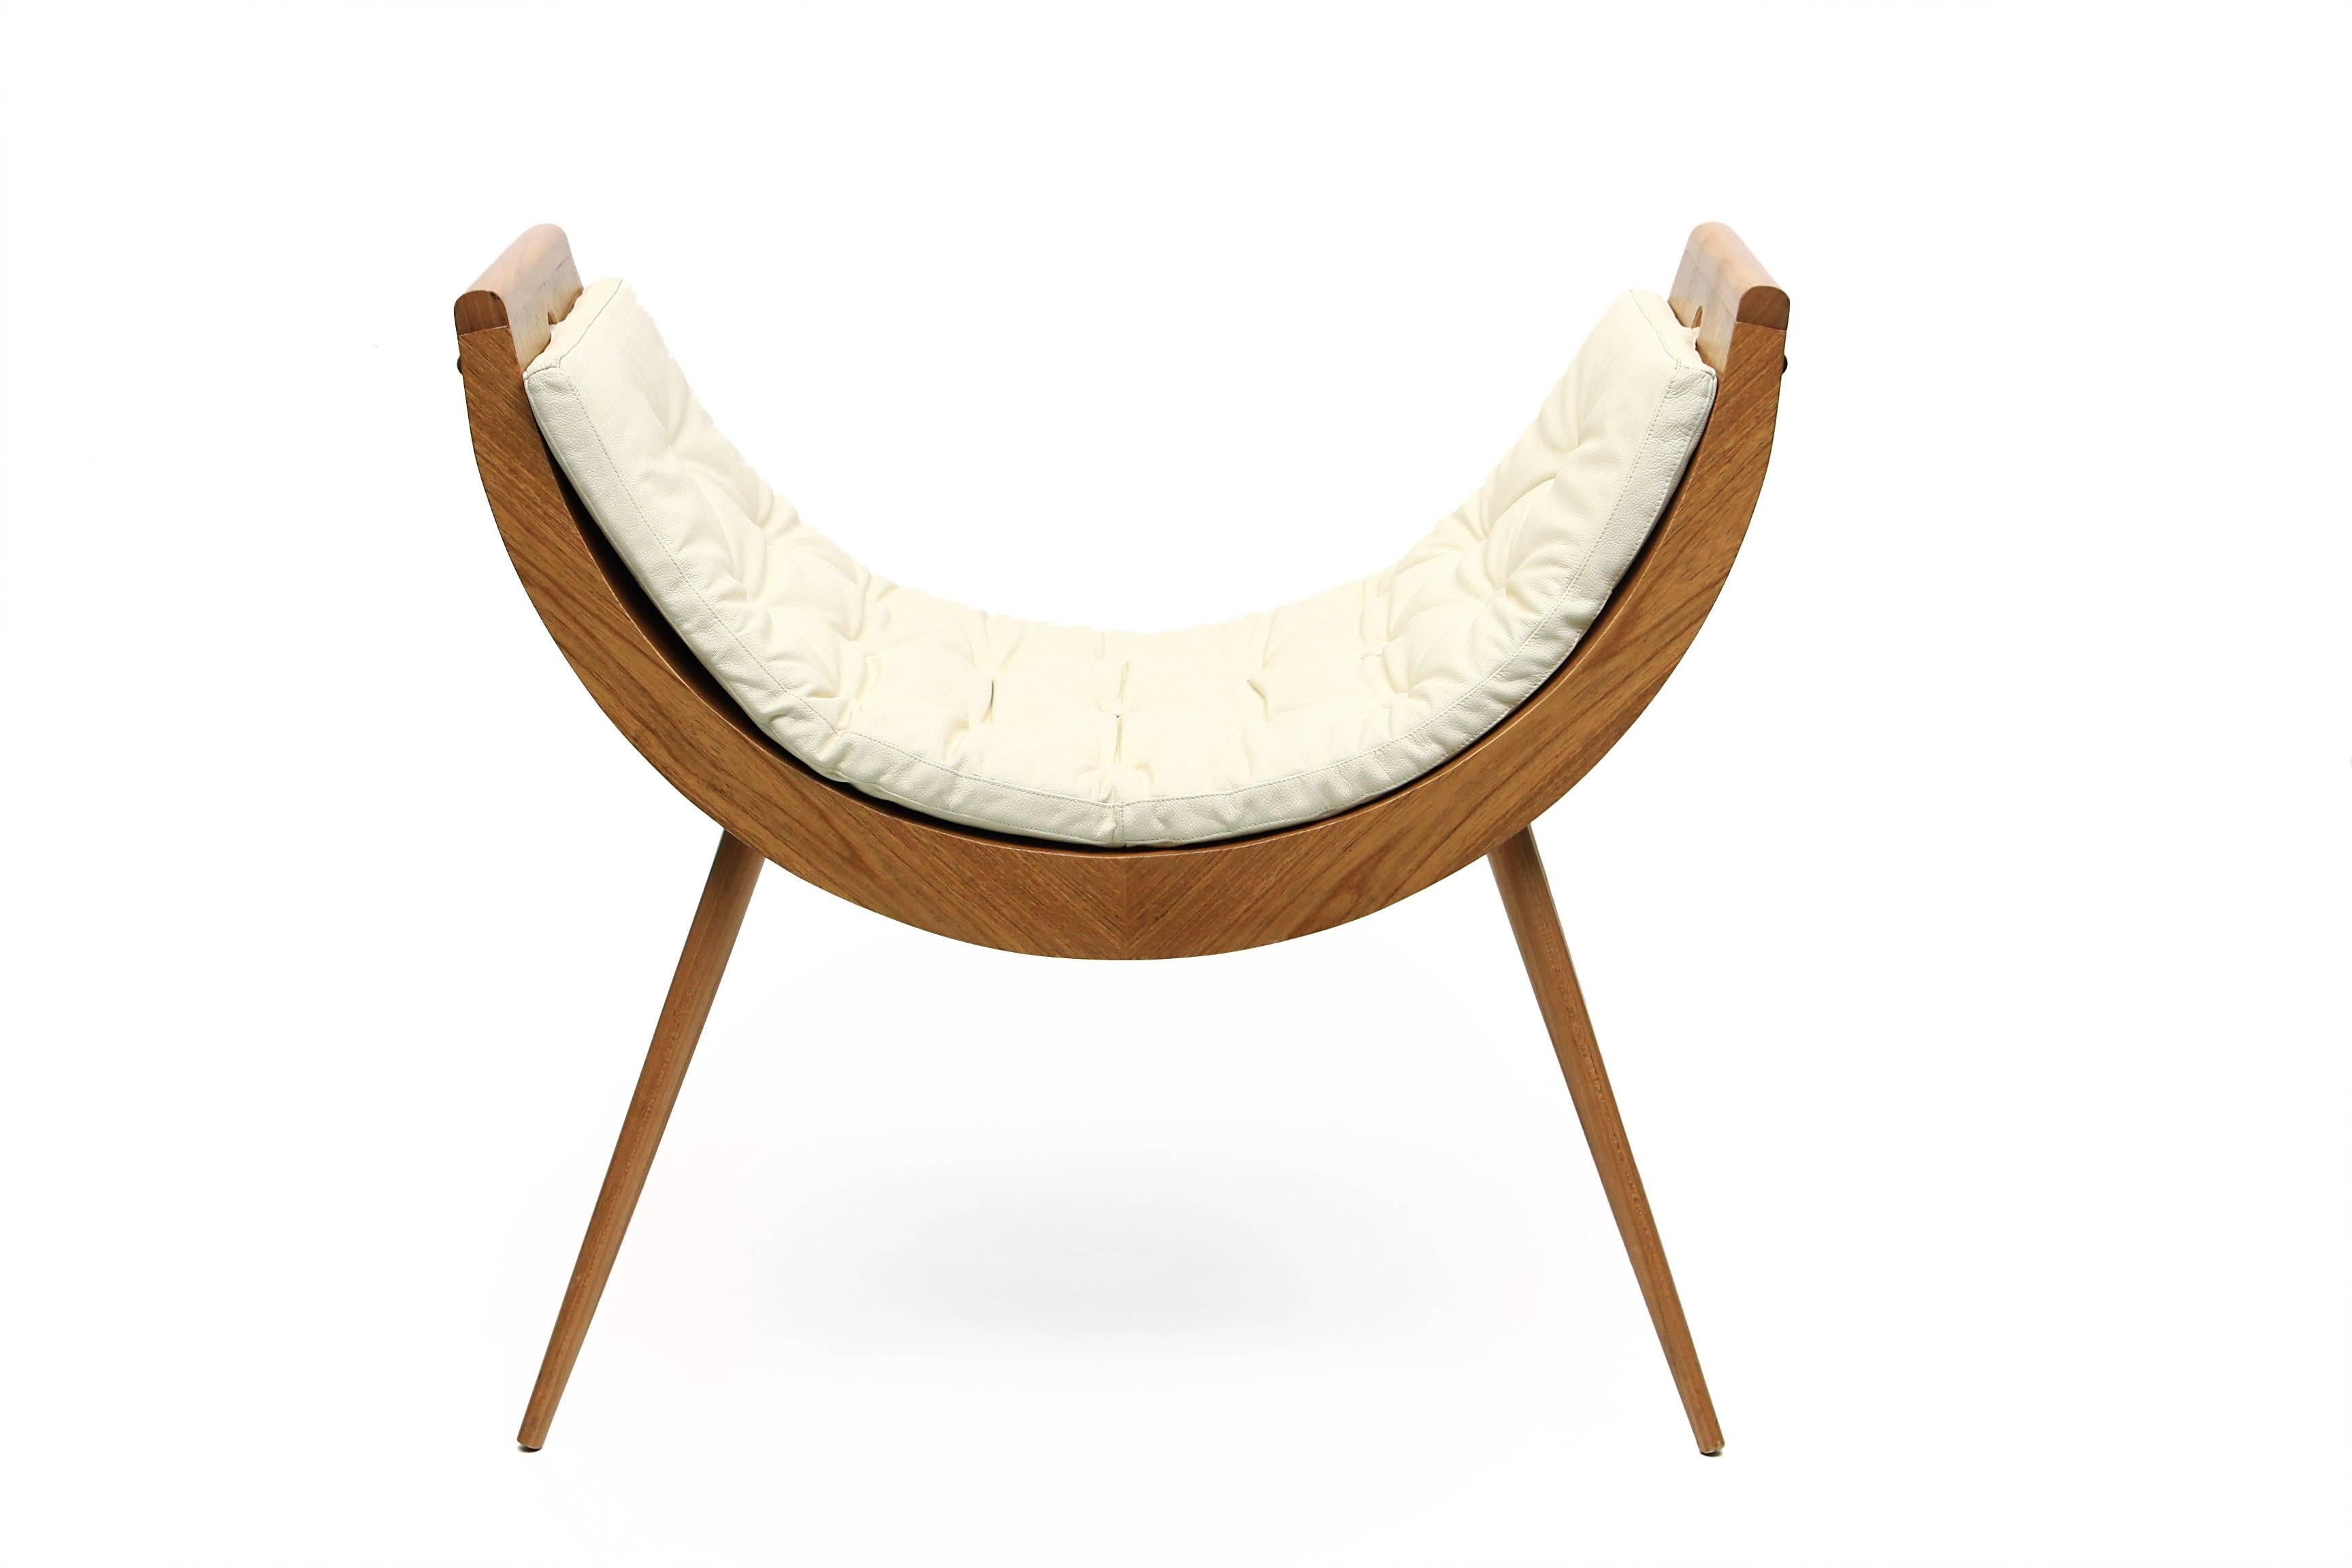 Rita Baiana Armchair/Daybed in the Brazilian Modern Design Style in Freijó Wood

The Rita Baiana armchair or daybed is a real modern brazilian design to its very core. As did the masters from this era, this piece plays around with a provocation